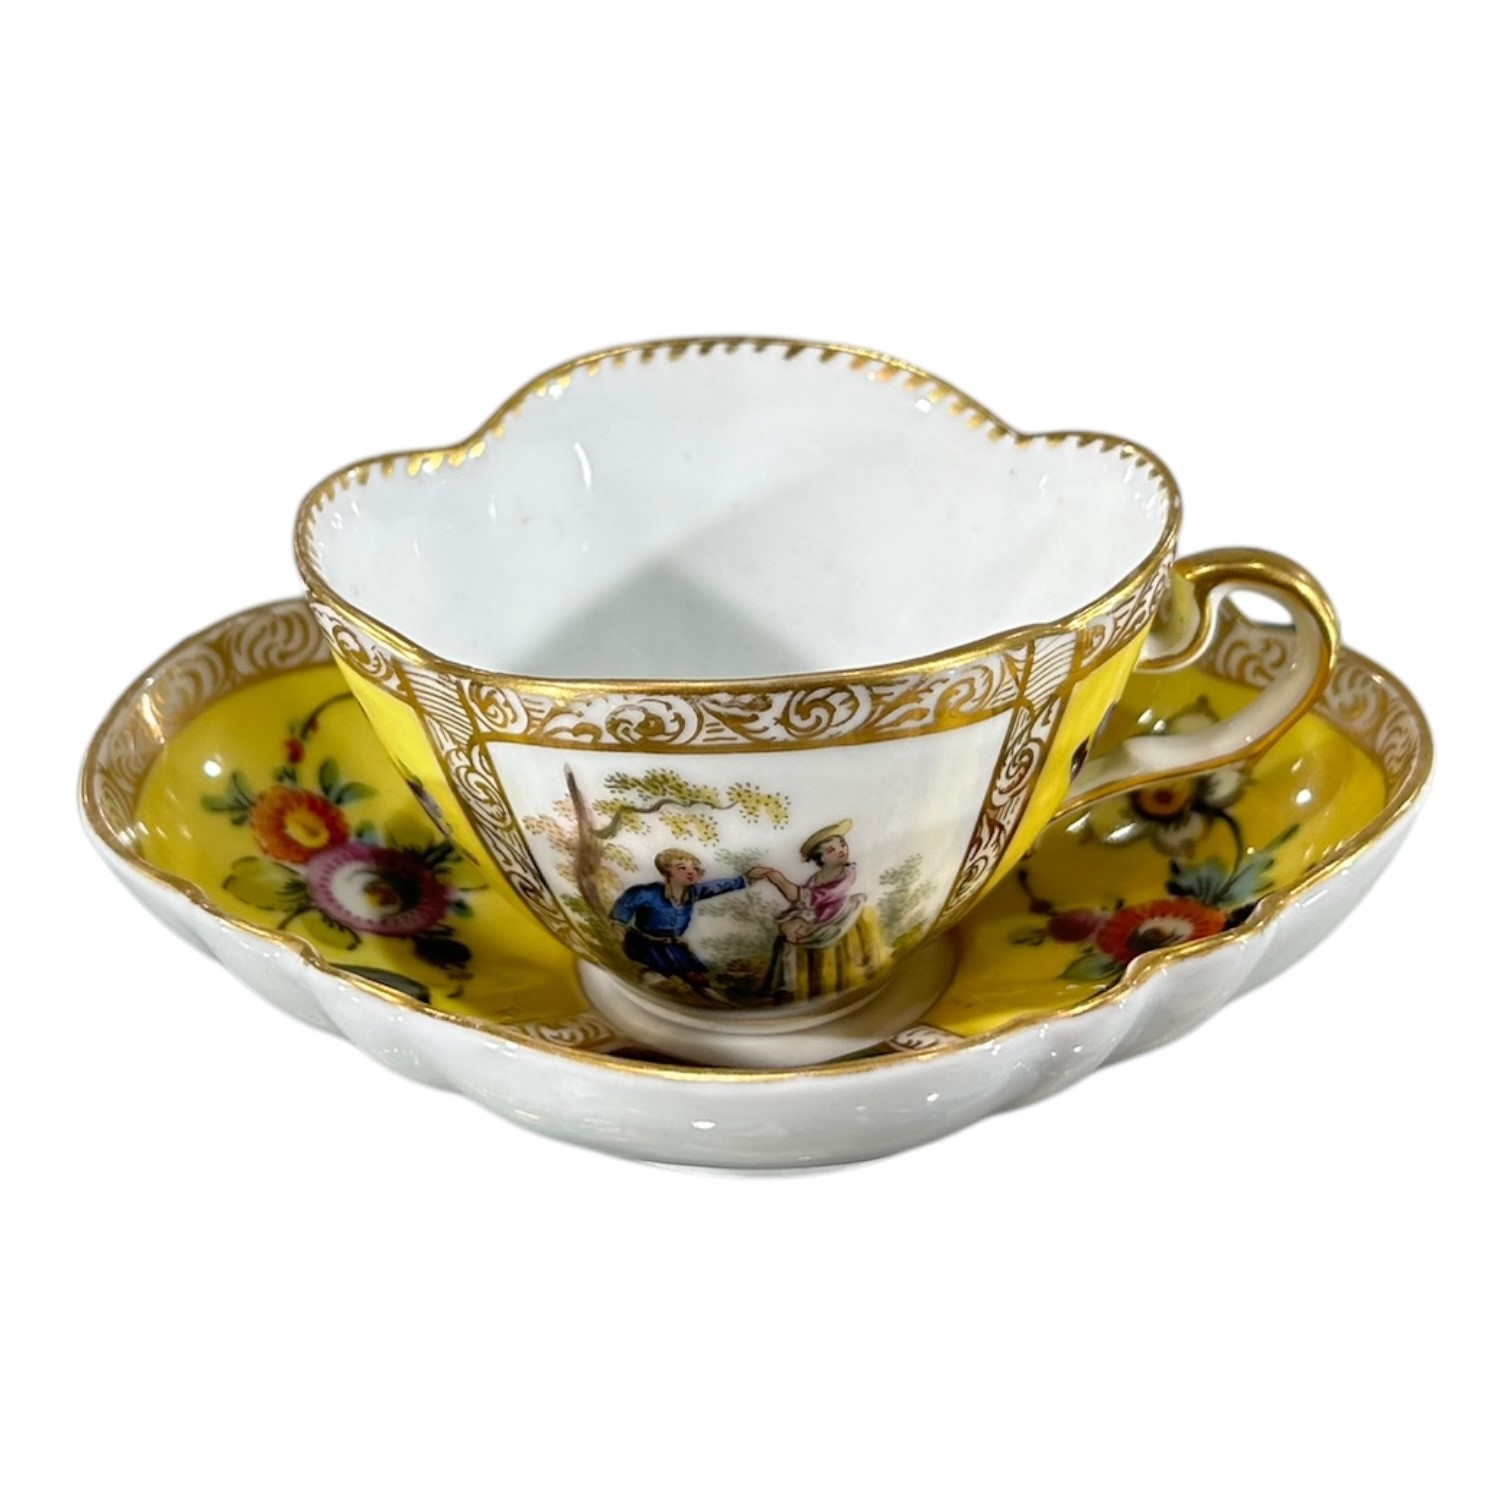 HELENA WOLFSOHN, DRESDEN, A LATE 19TH CENTURY PORCELAIN QUATREFOIL CABINET CUP AND SAUCER, - Image 5 of 8